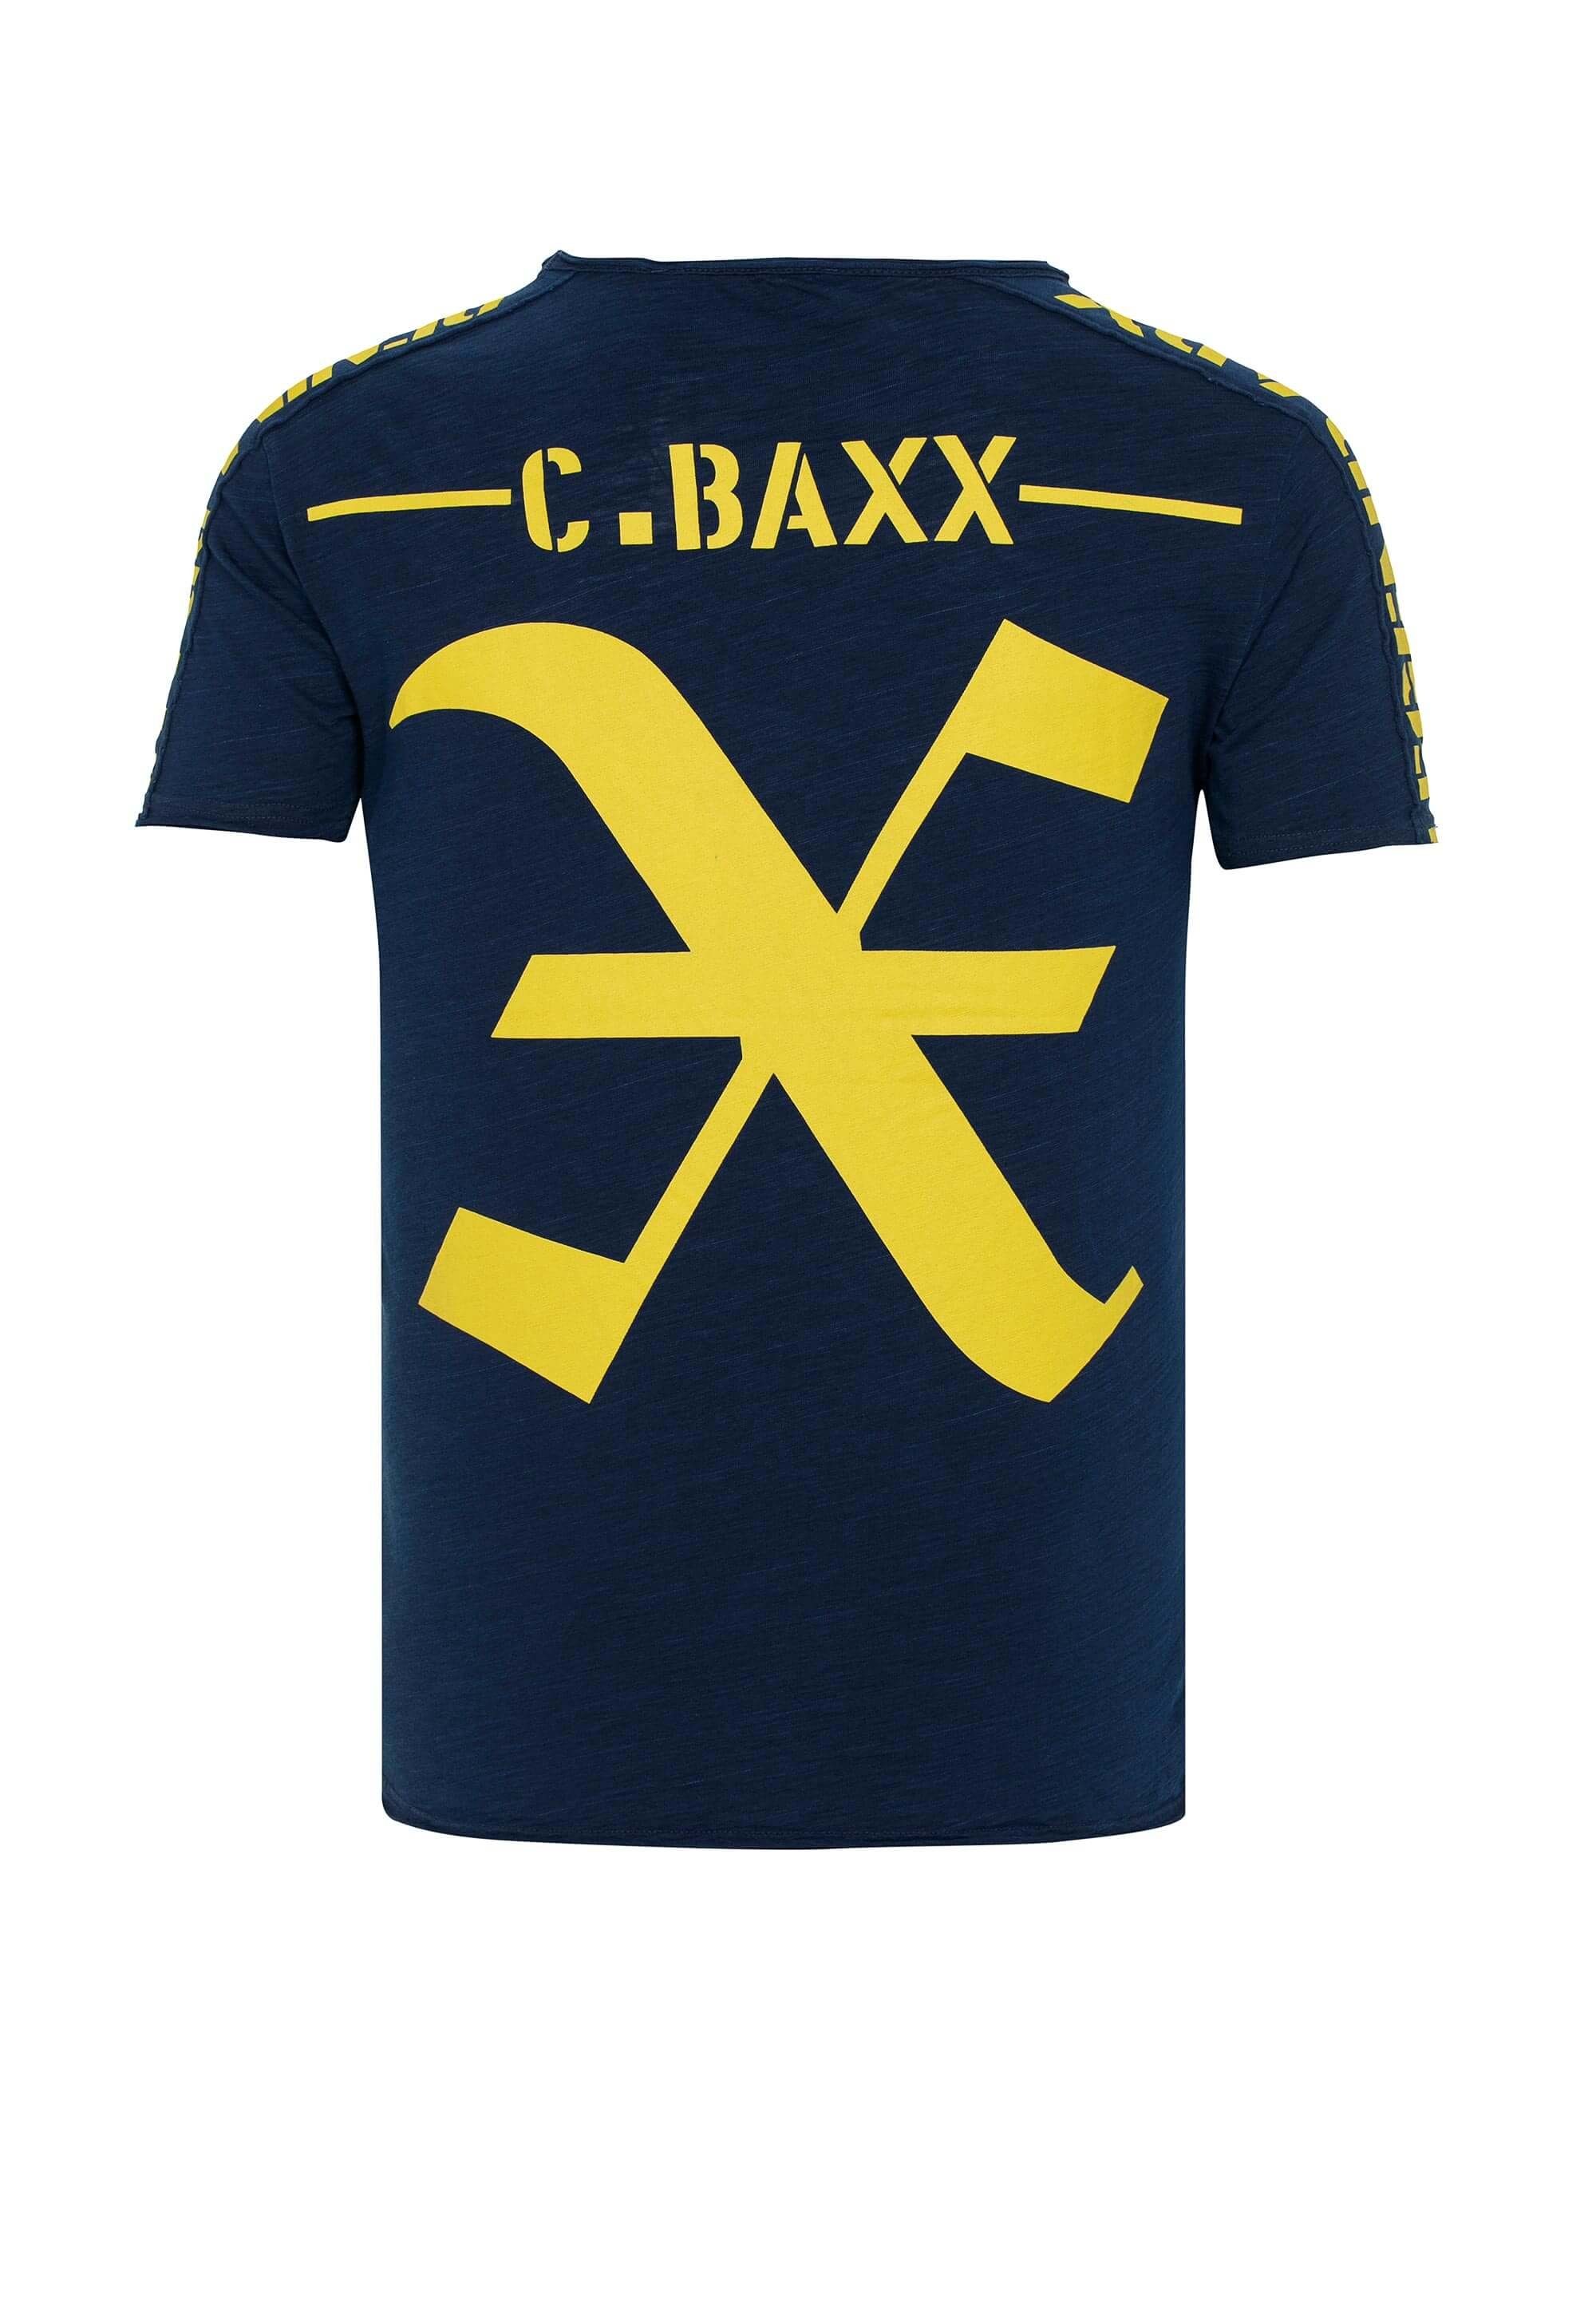 Baxx T-Shirt Relaxed-Fit & im Cipo